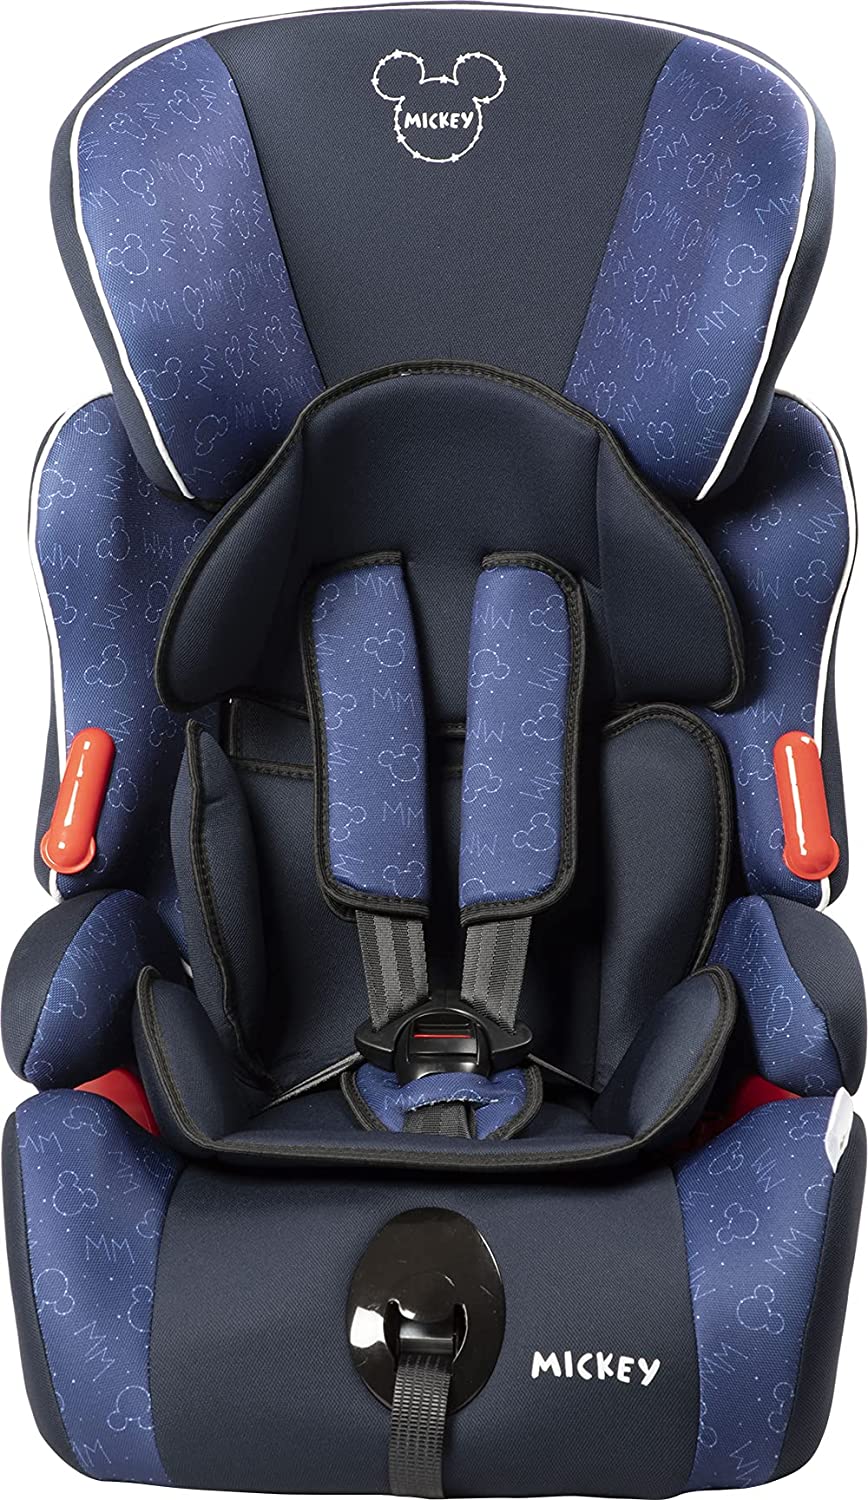 Disney Mickey Mouse Isofix Car Seat Group 1/2/3 (9-36 kg)